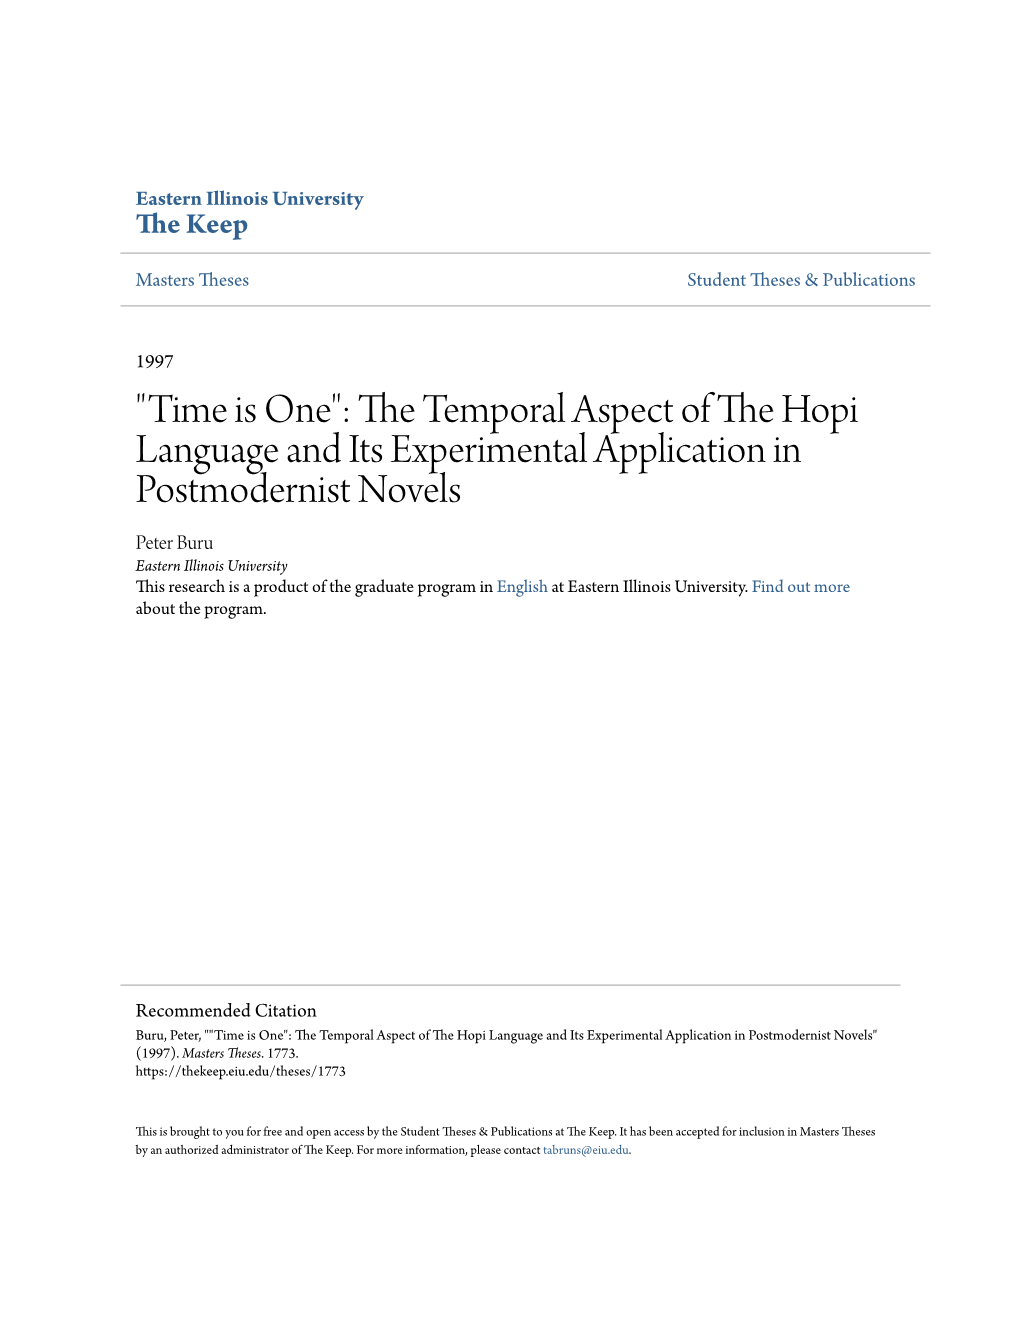 The Temporal Aspect of the Hopi Language and Its Experimental